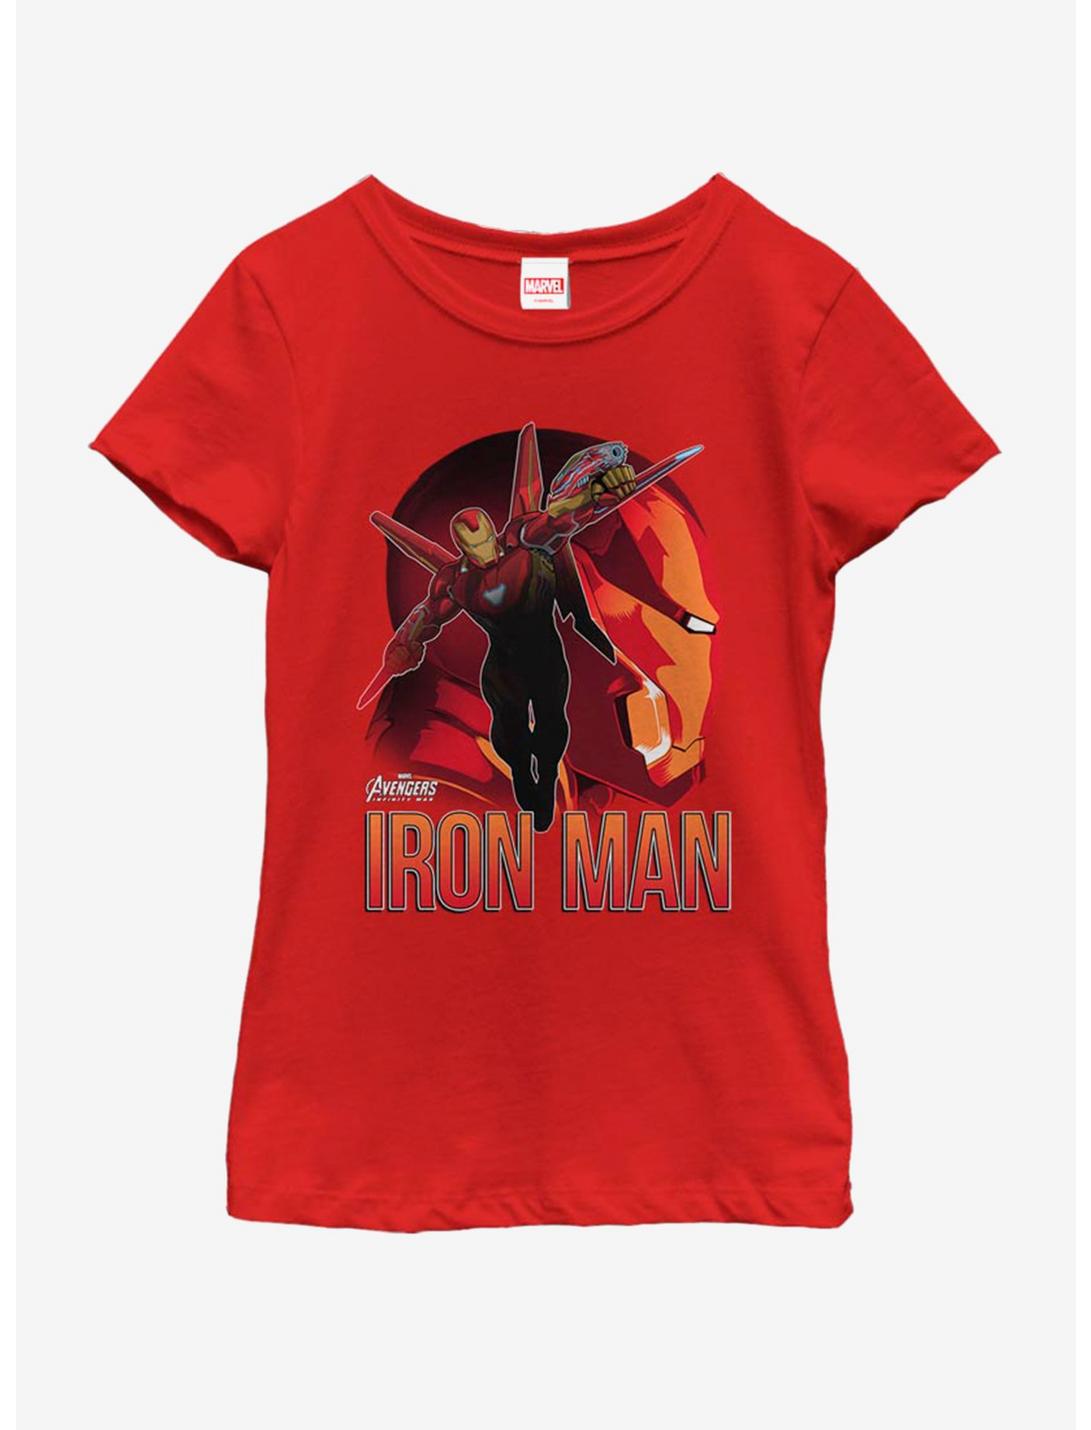 Marvel Ironman Invincible Sil Youth Girls T-Shirt, RED, hi-res